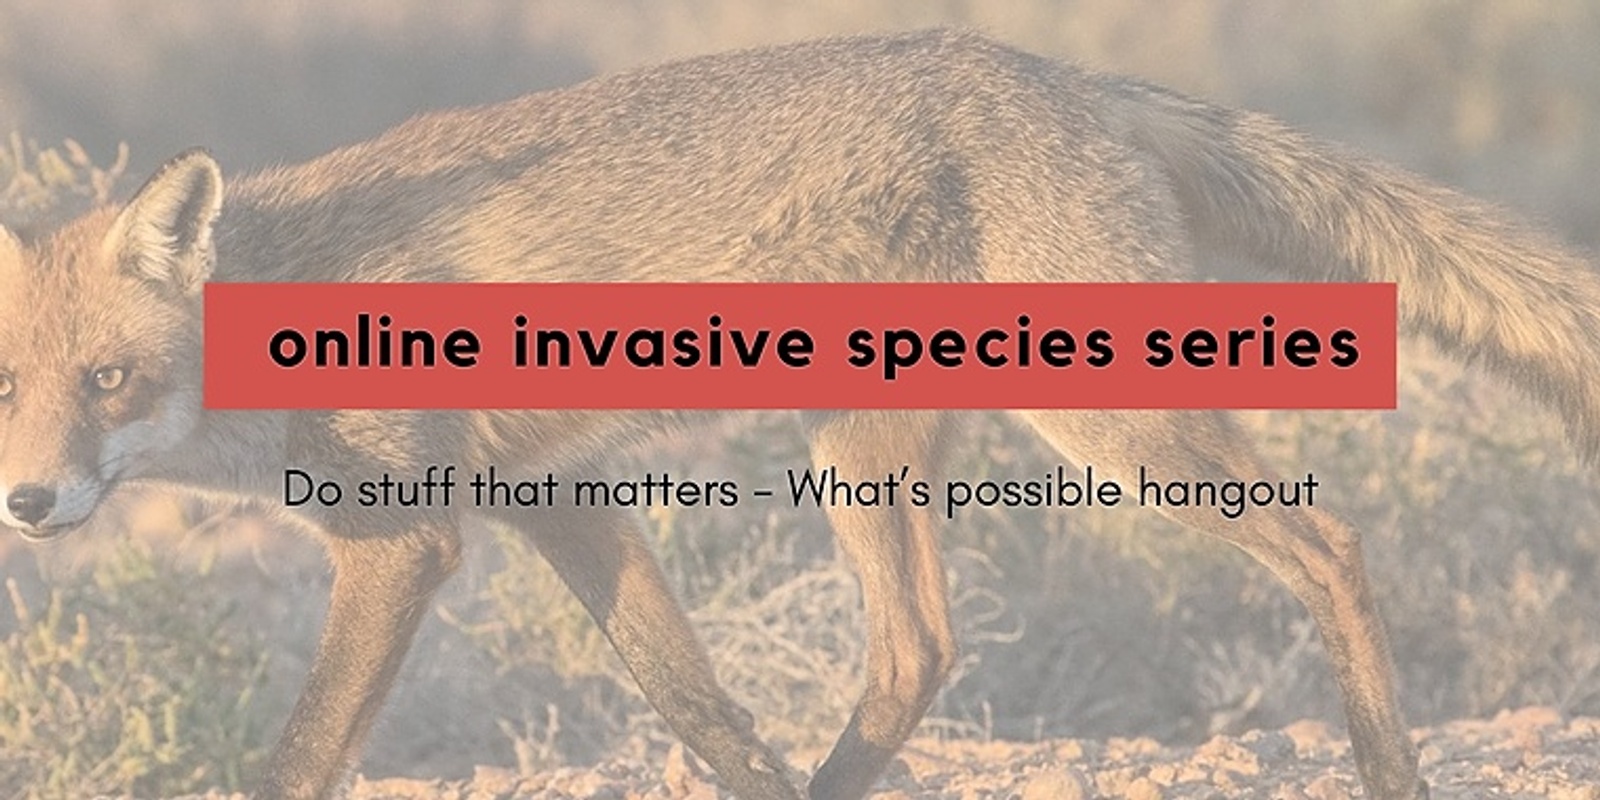 Do stuff that matters - What's possible hangout | Online invasive species series